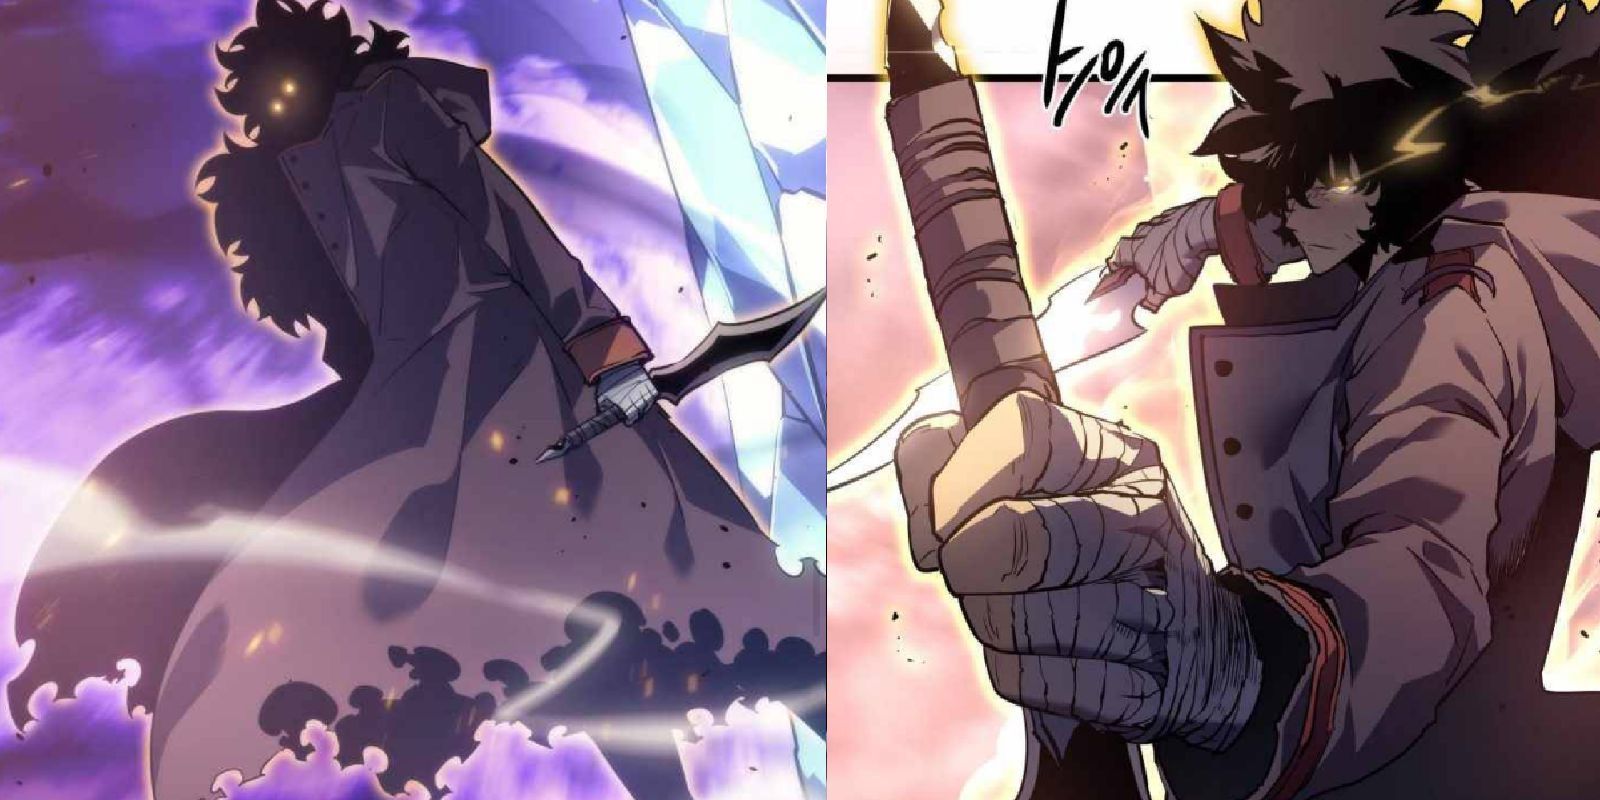 sung ilhwan shows off his power in solo leveling manhwa